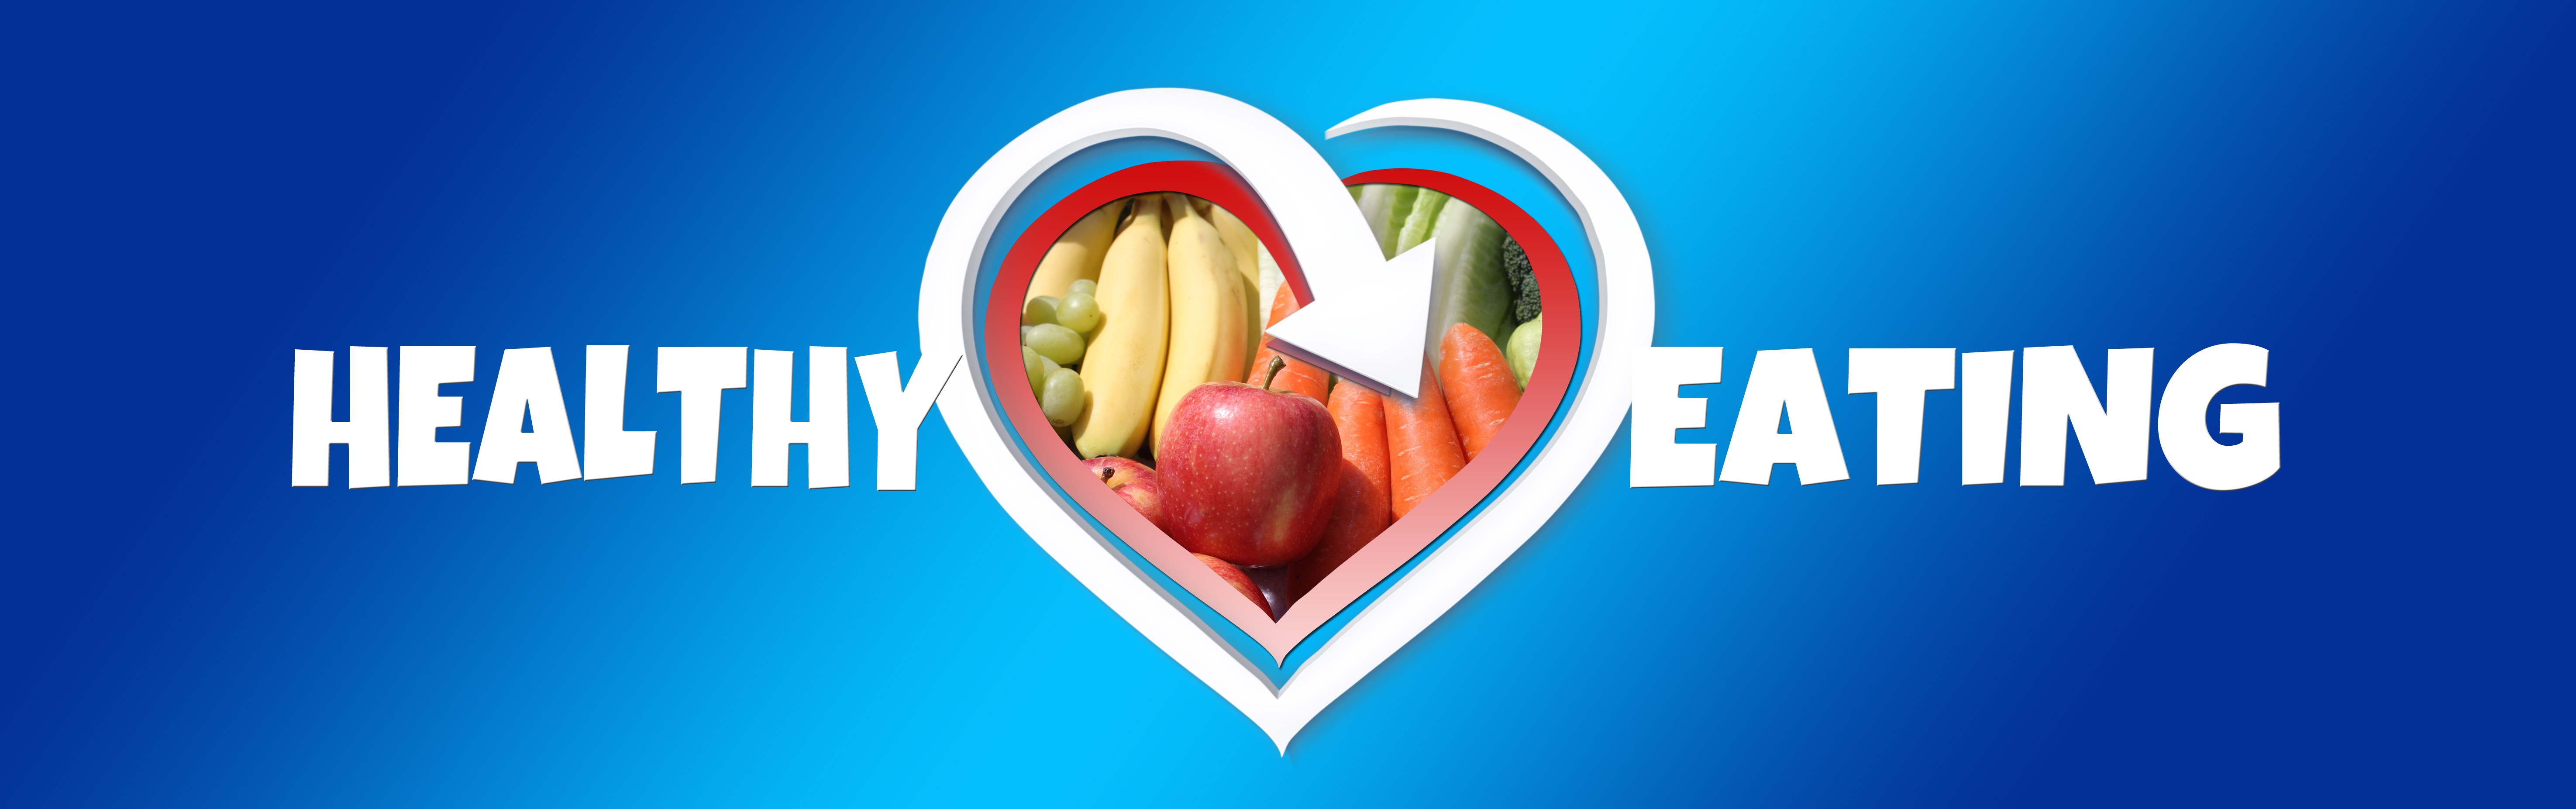 Healthy eating, blue Banner free image download